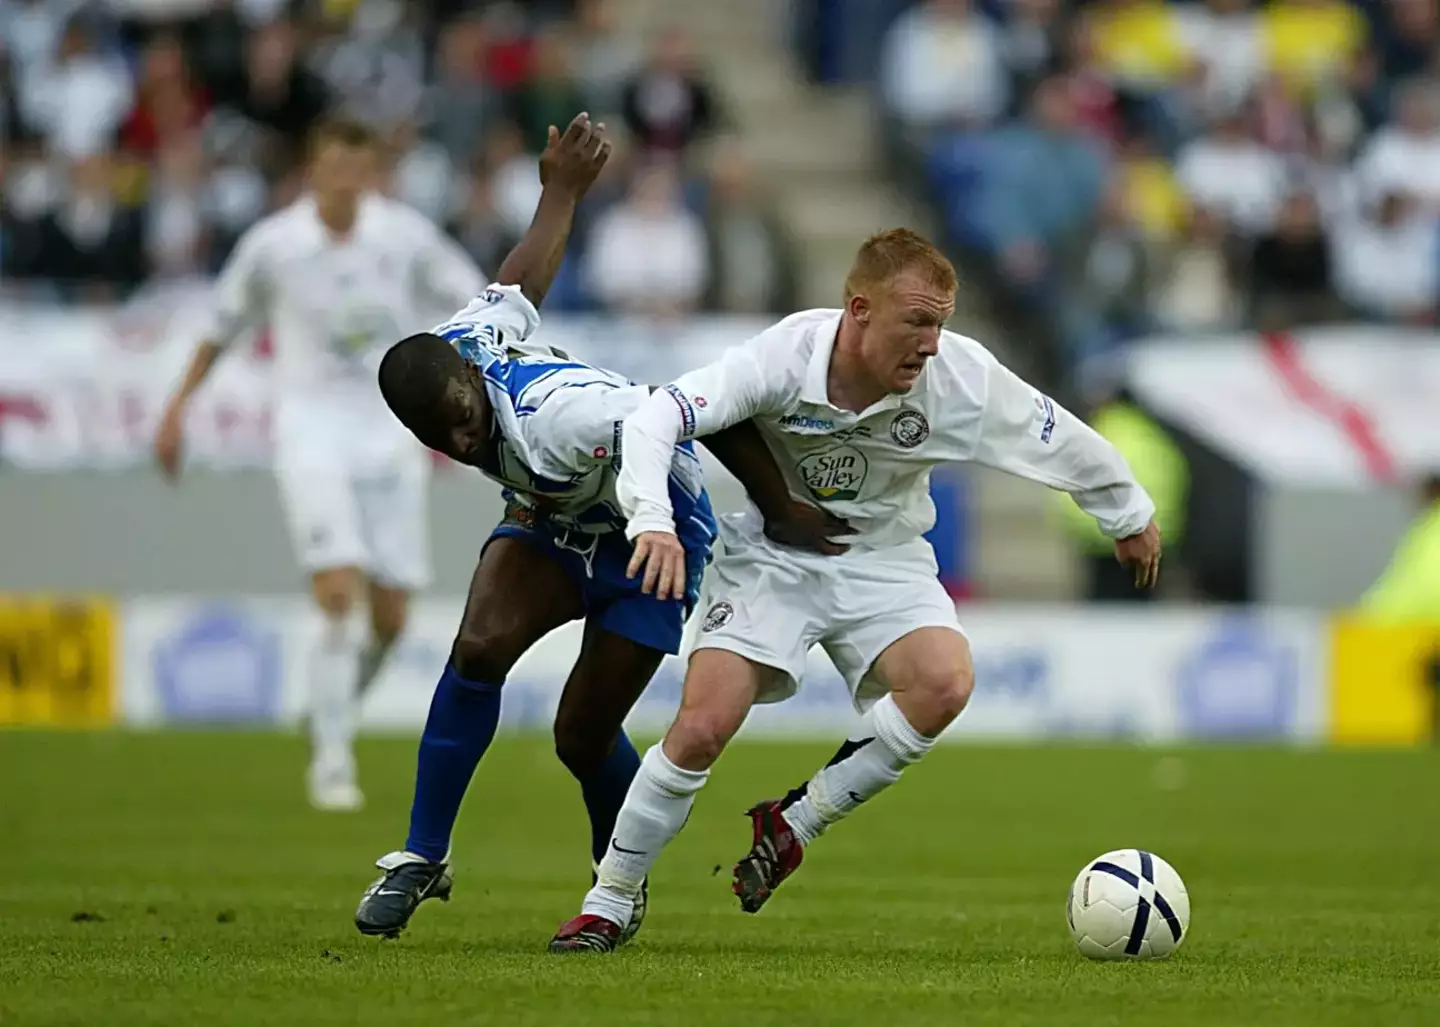 Ferrell playing for Hereford United in the early noughties.